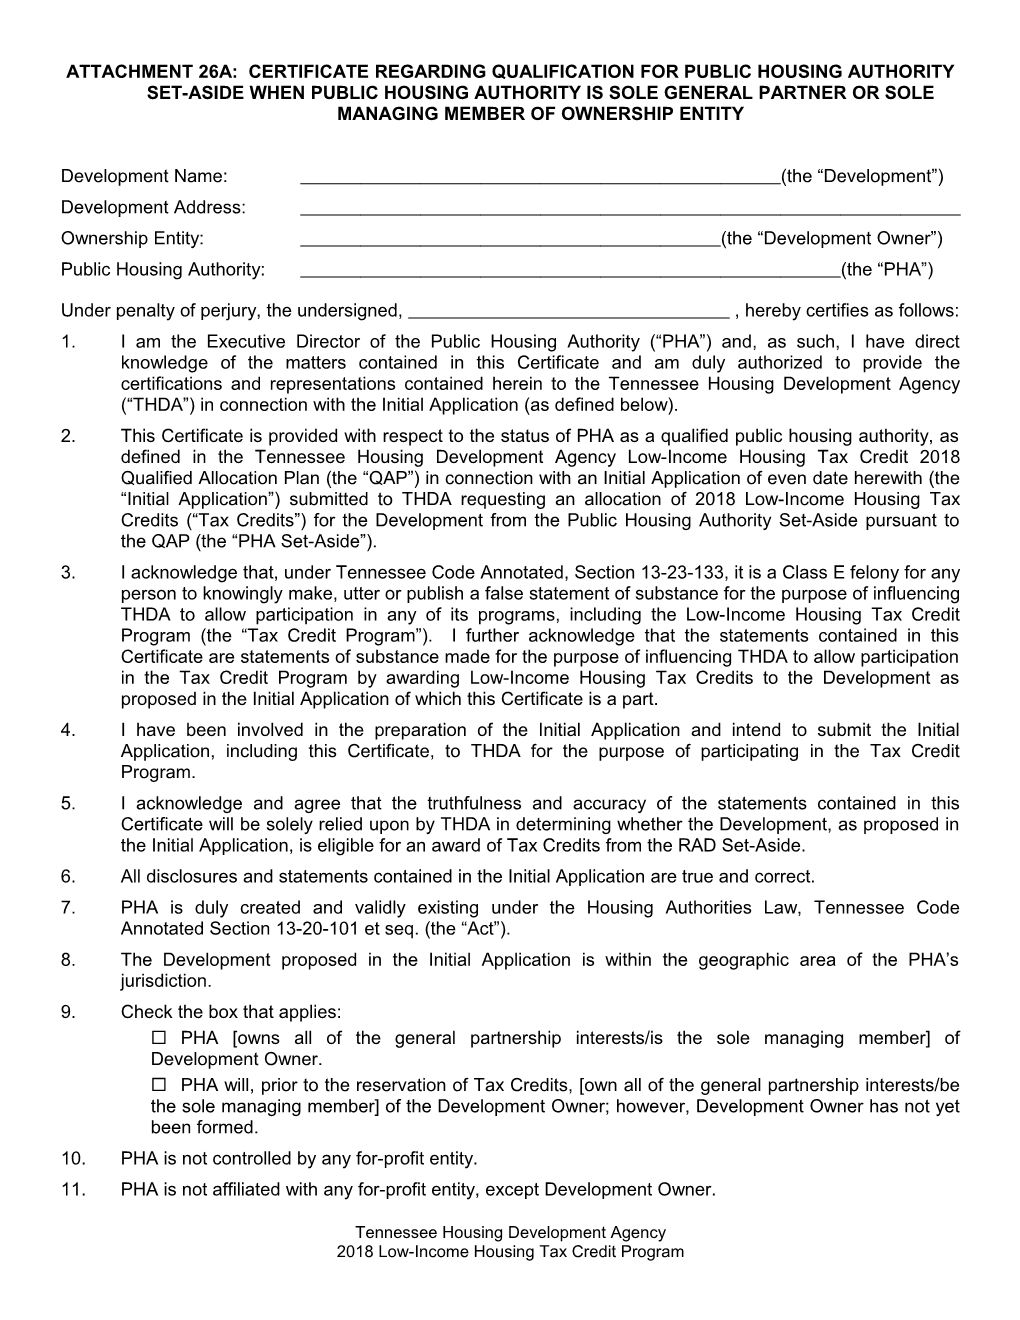 Attachment 26A: Certificate Regarding Qualification for Public Housing Authorityset-Aside